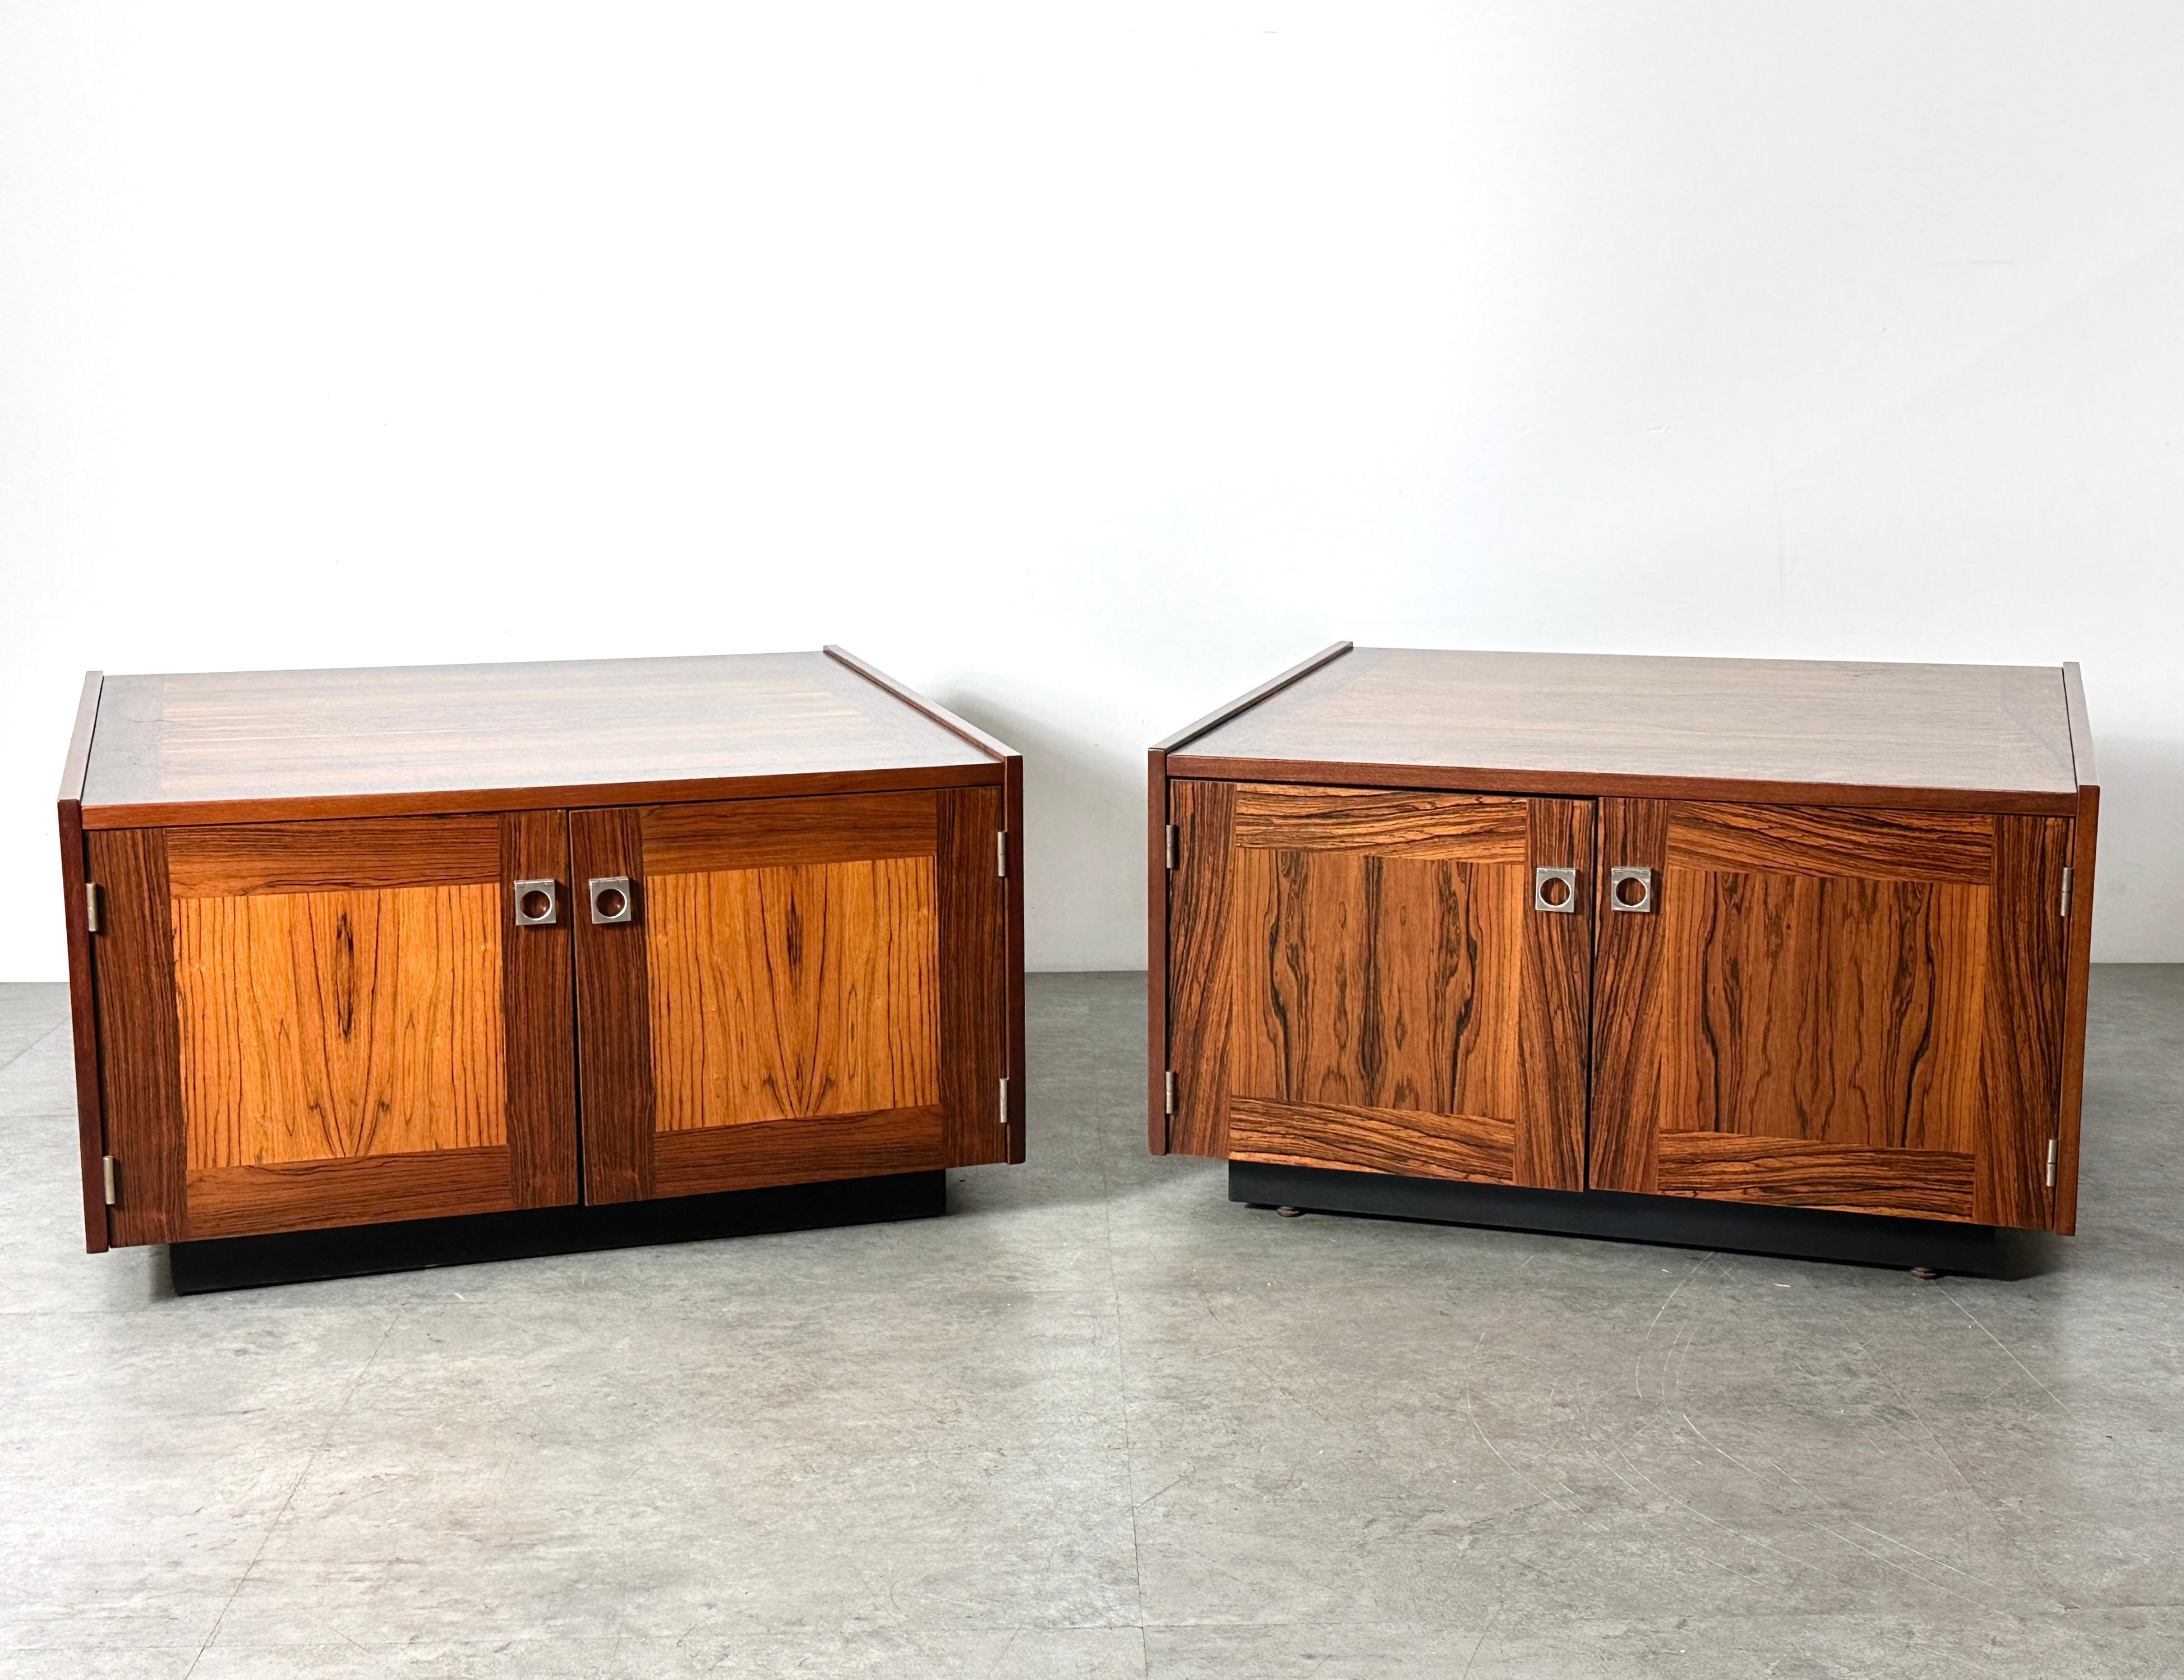 Rare Pair Vintage Danish rosewood coffee tables or Side Tables or nightstands by Johannes Sorth for Bornholms Møbelfabrik 1960s. Square coffee tables with doors in the front and storage in the back. The rosewood is truly spectacular. Stylish Danish